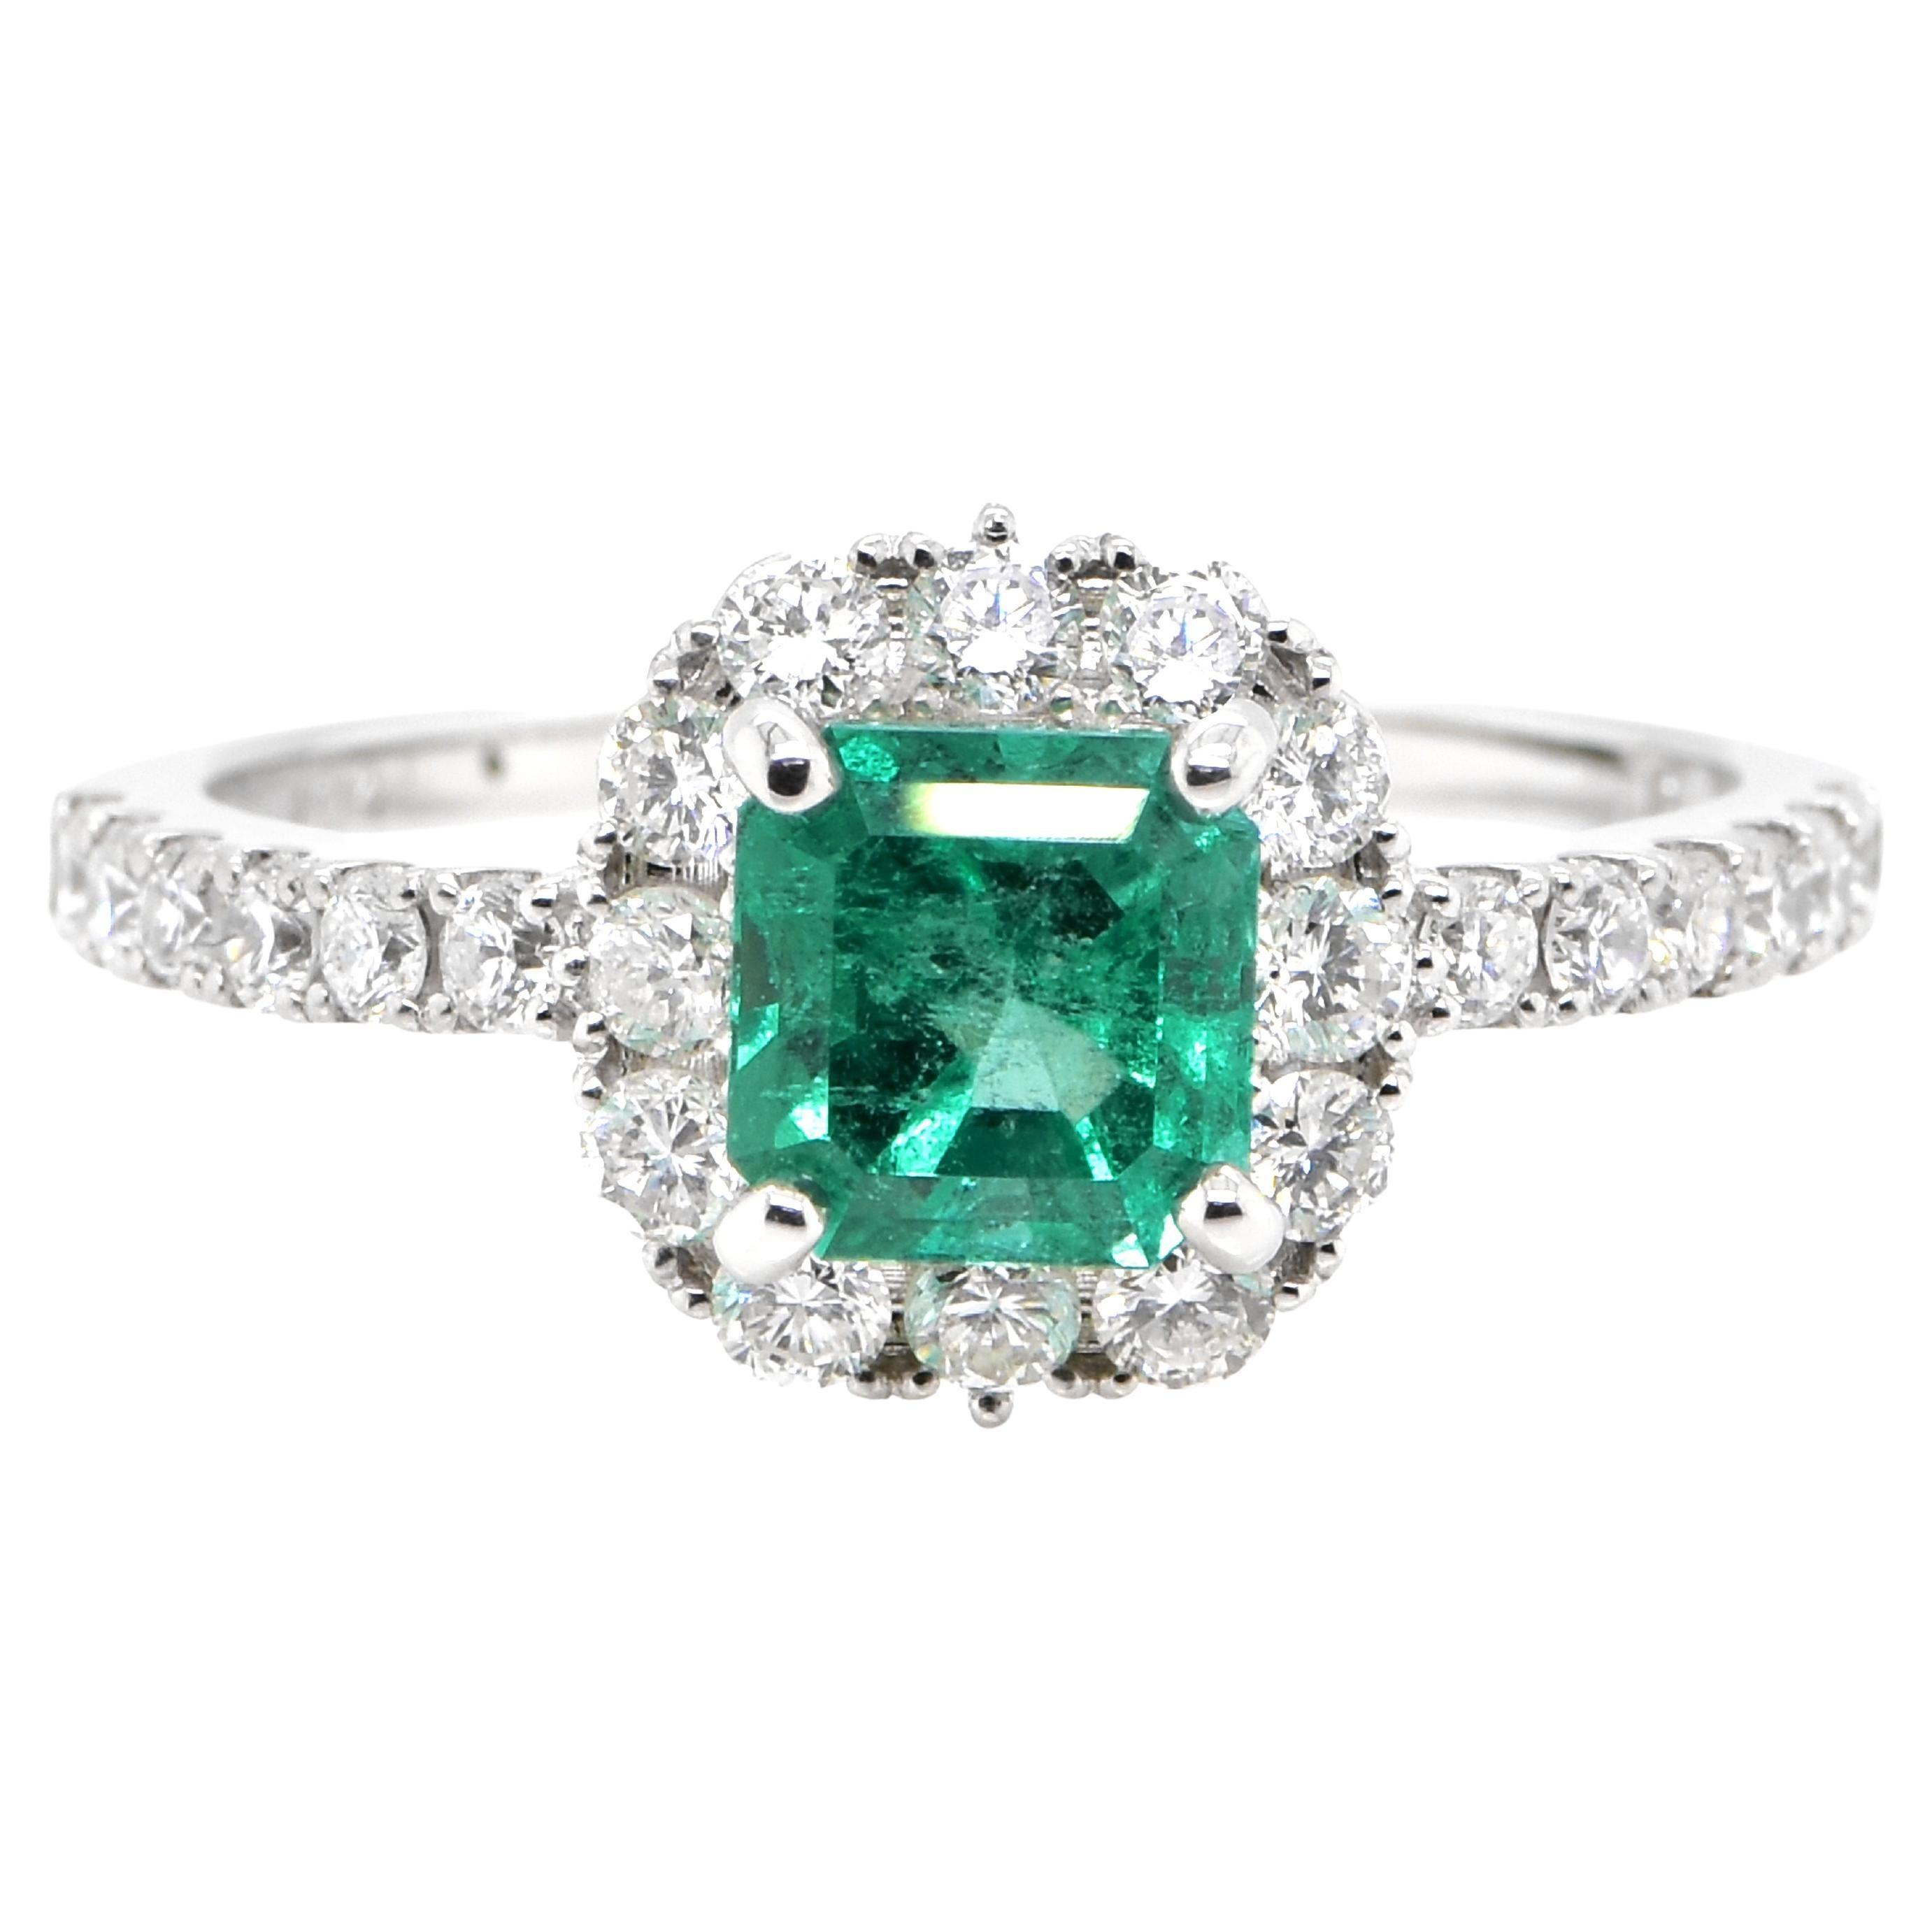 1.10 Carat Natural Colombian Emerald and Diamond Halo Ring set in Platinum